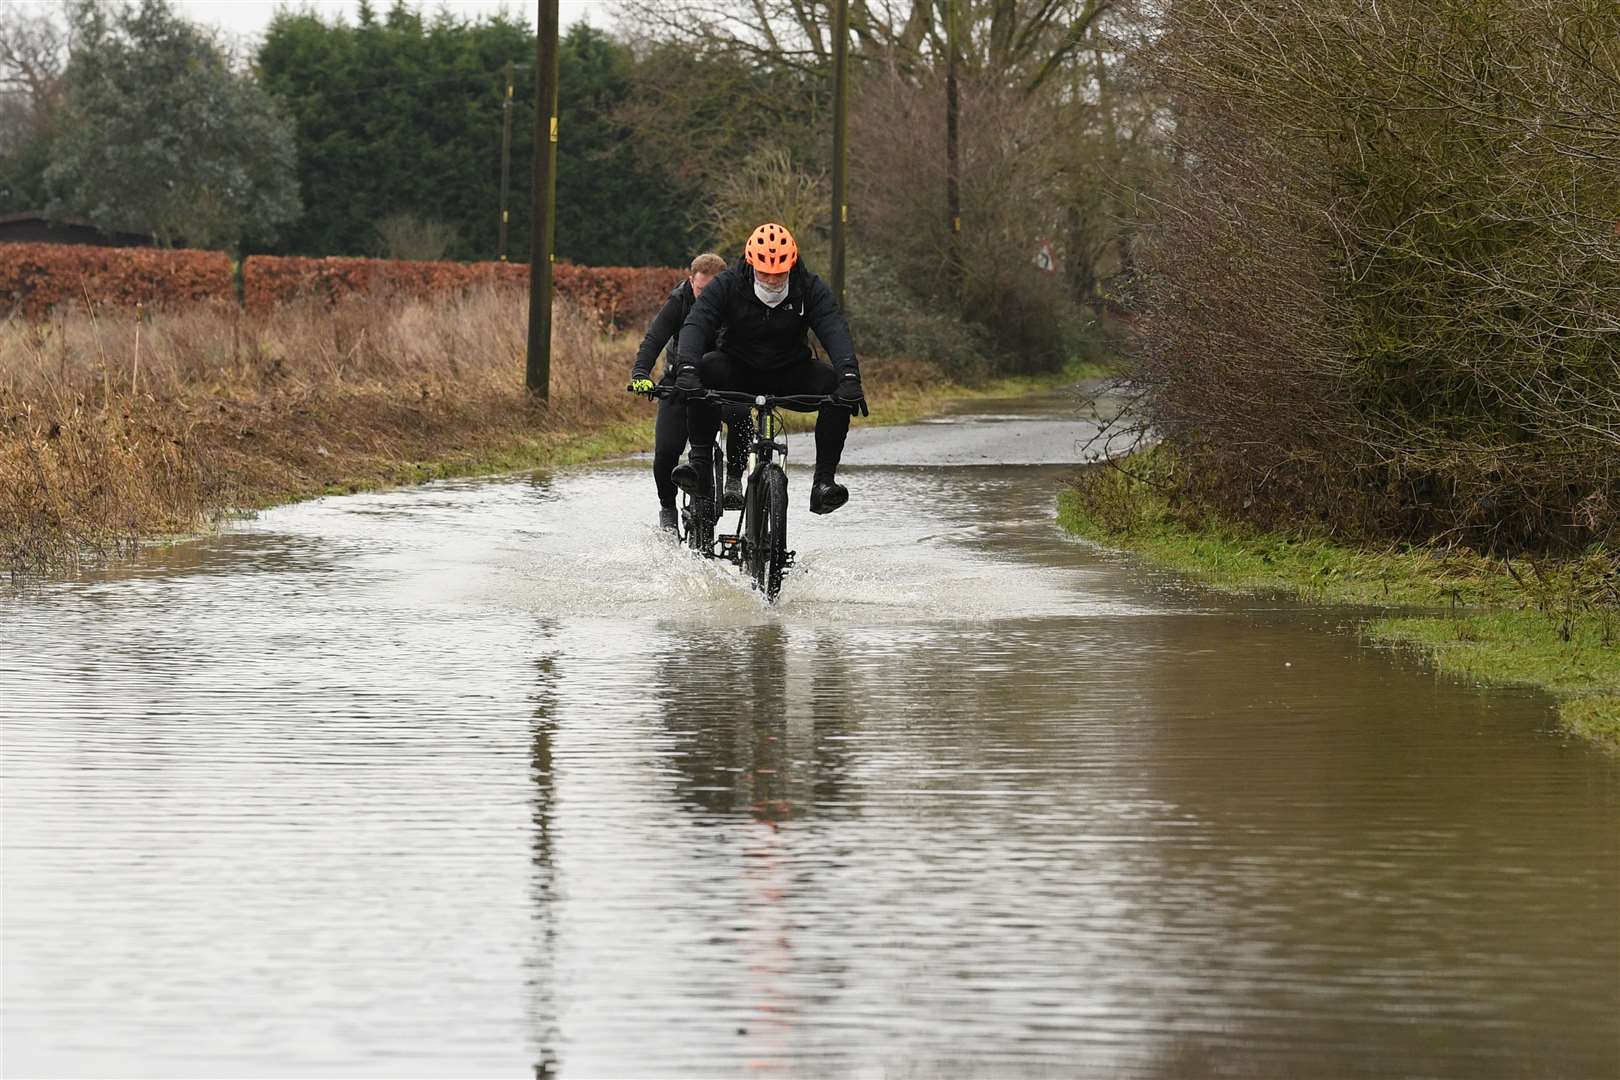 Cyclists make their way through flood water on Mountnessing Road in Billericay, Essex (Stefan Rousseau/PA)